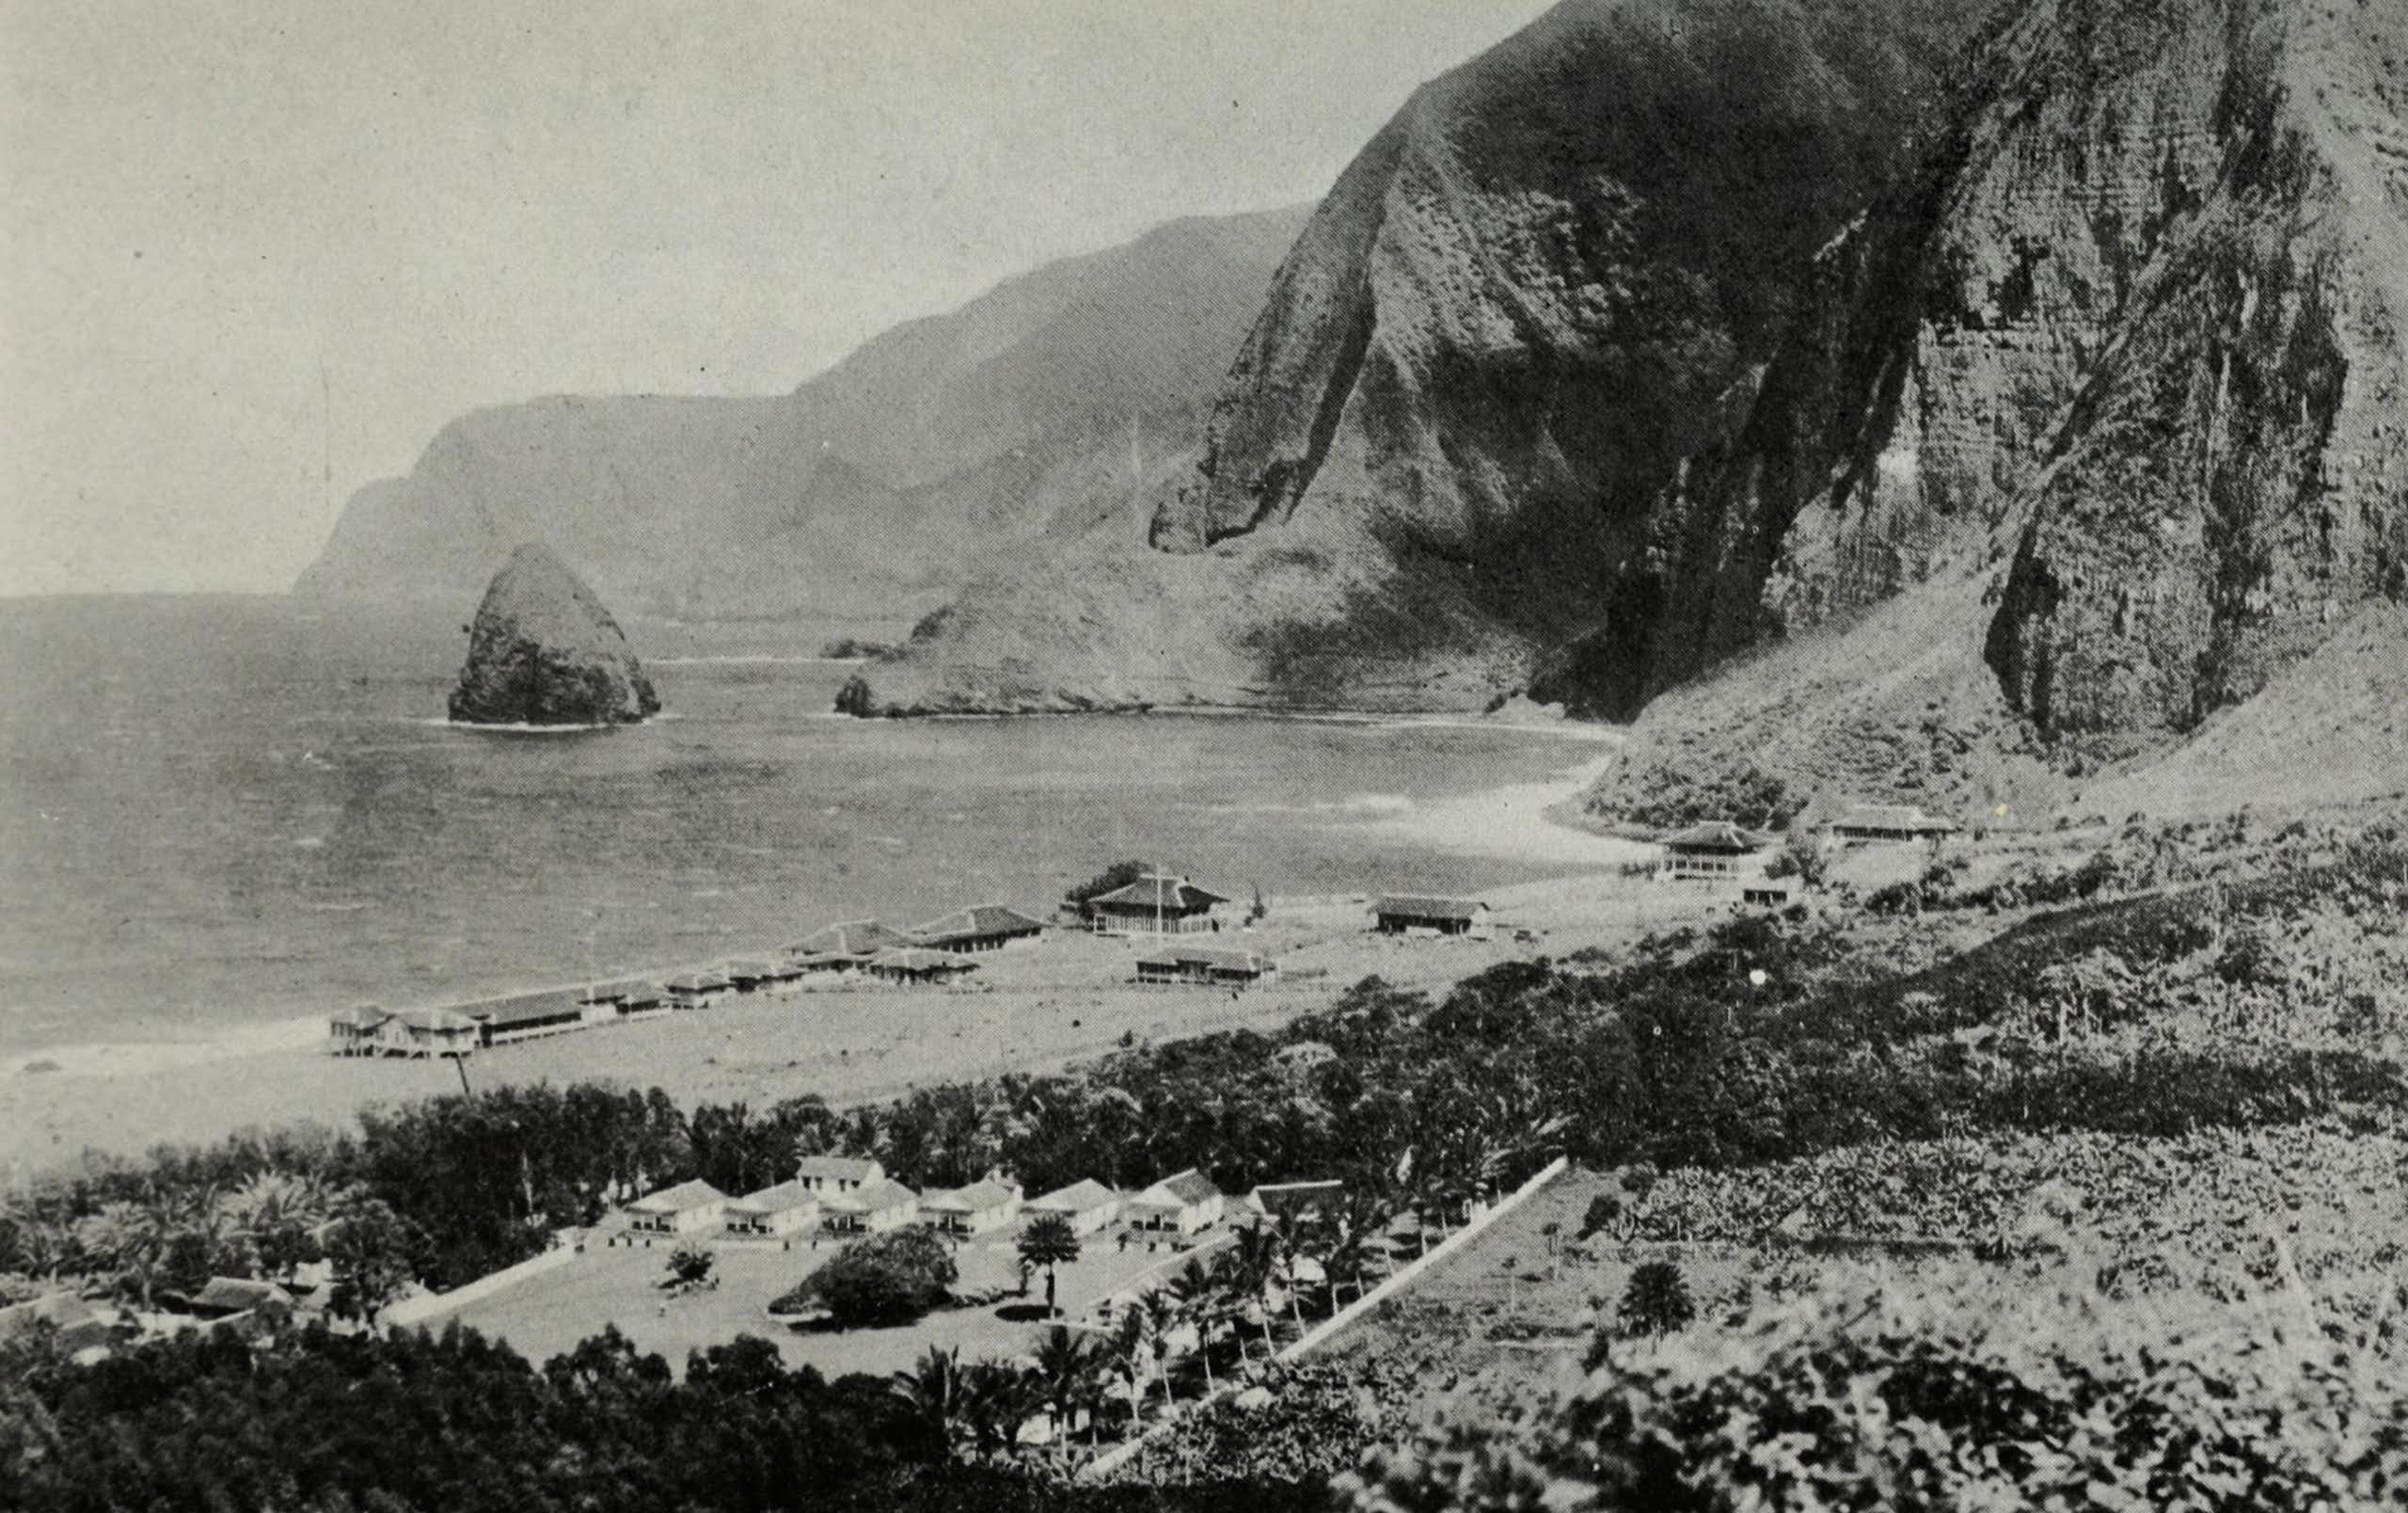 A black and white photo of a small settlement of buildings on a coast, with cliffs visible in the background.